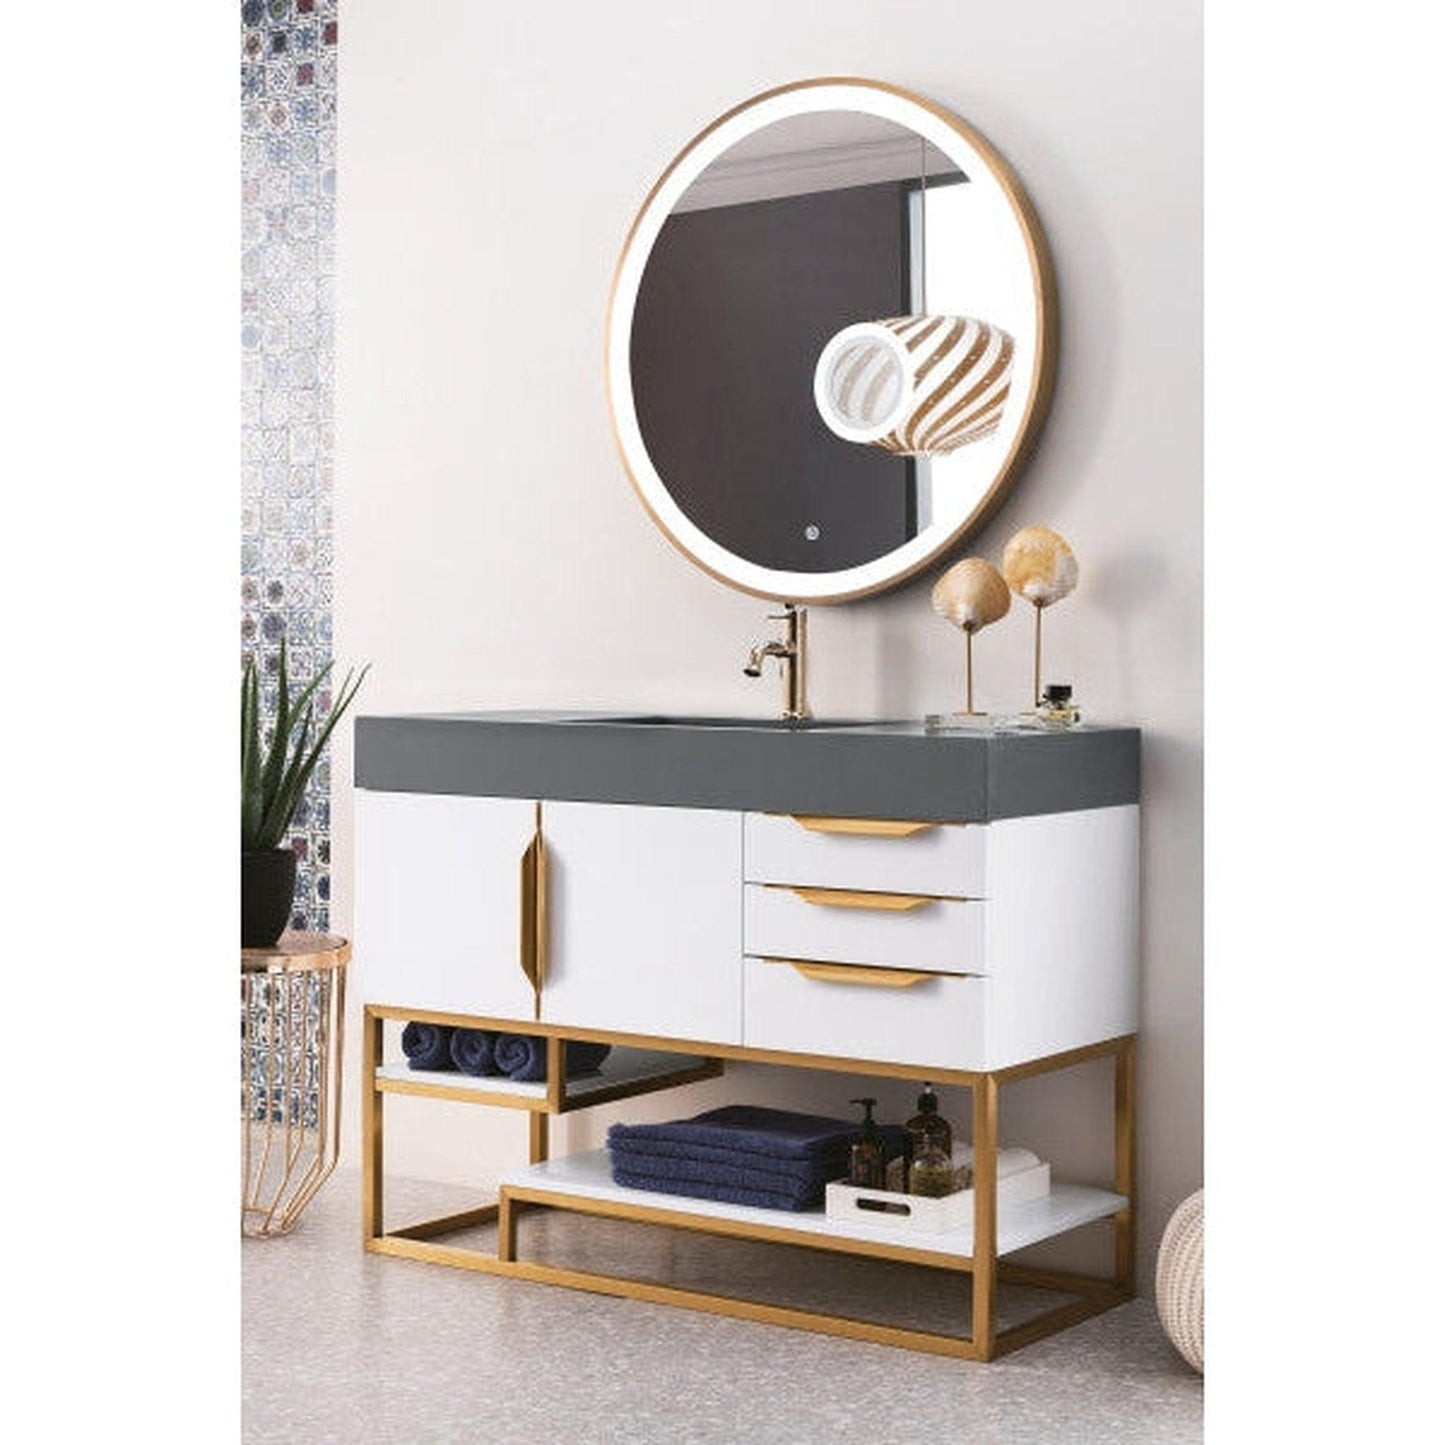 James Martin Columbia 48" Single Glossy White Bathroom Vanity With Radiant Gold Hardware and 6" Glossy Dusk Gray Composite Countertop